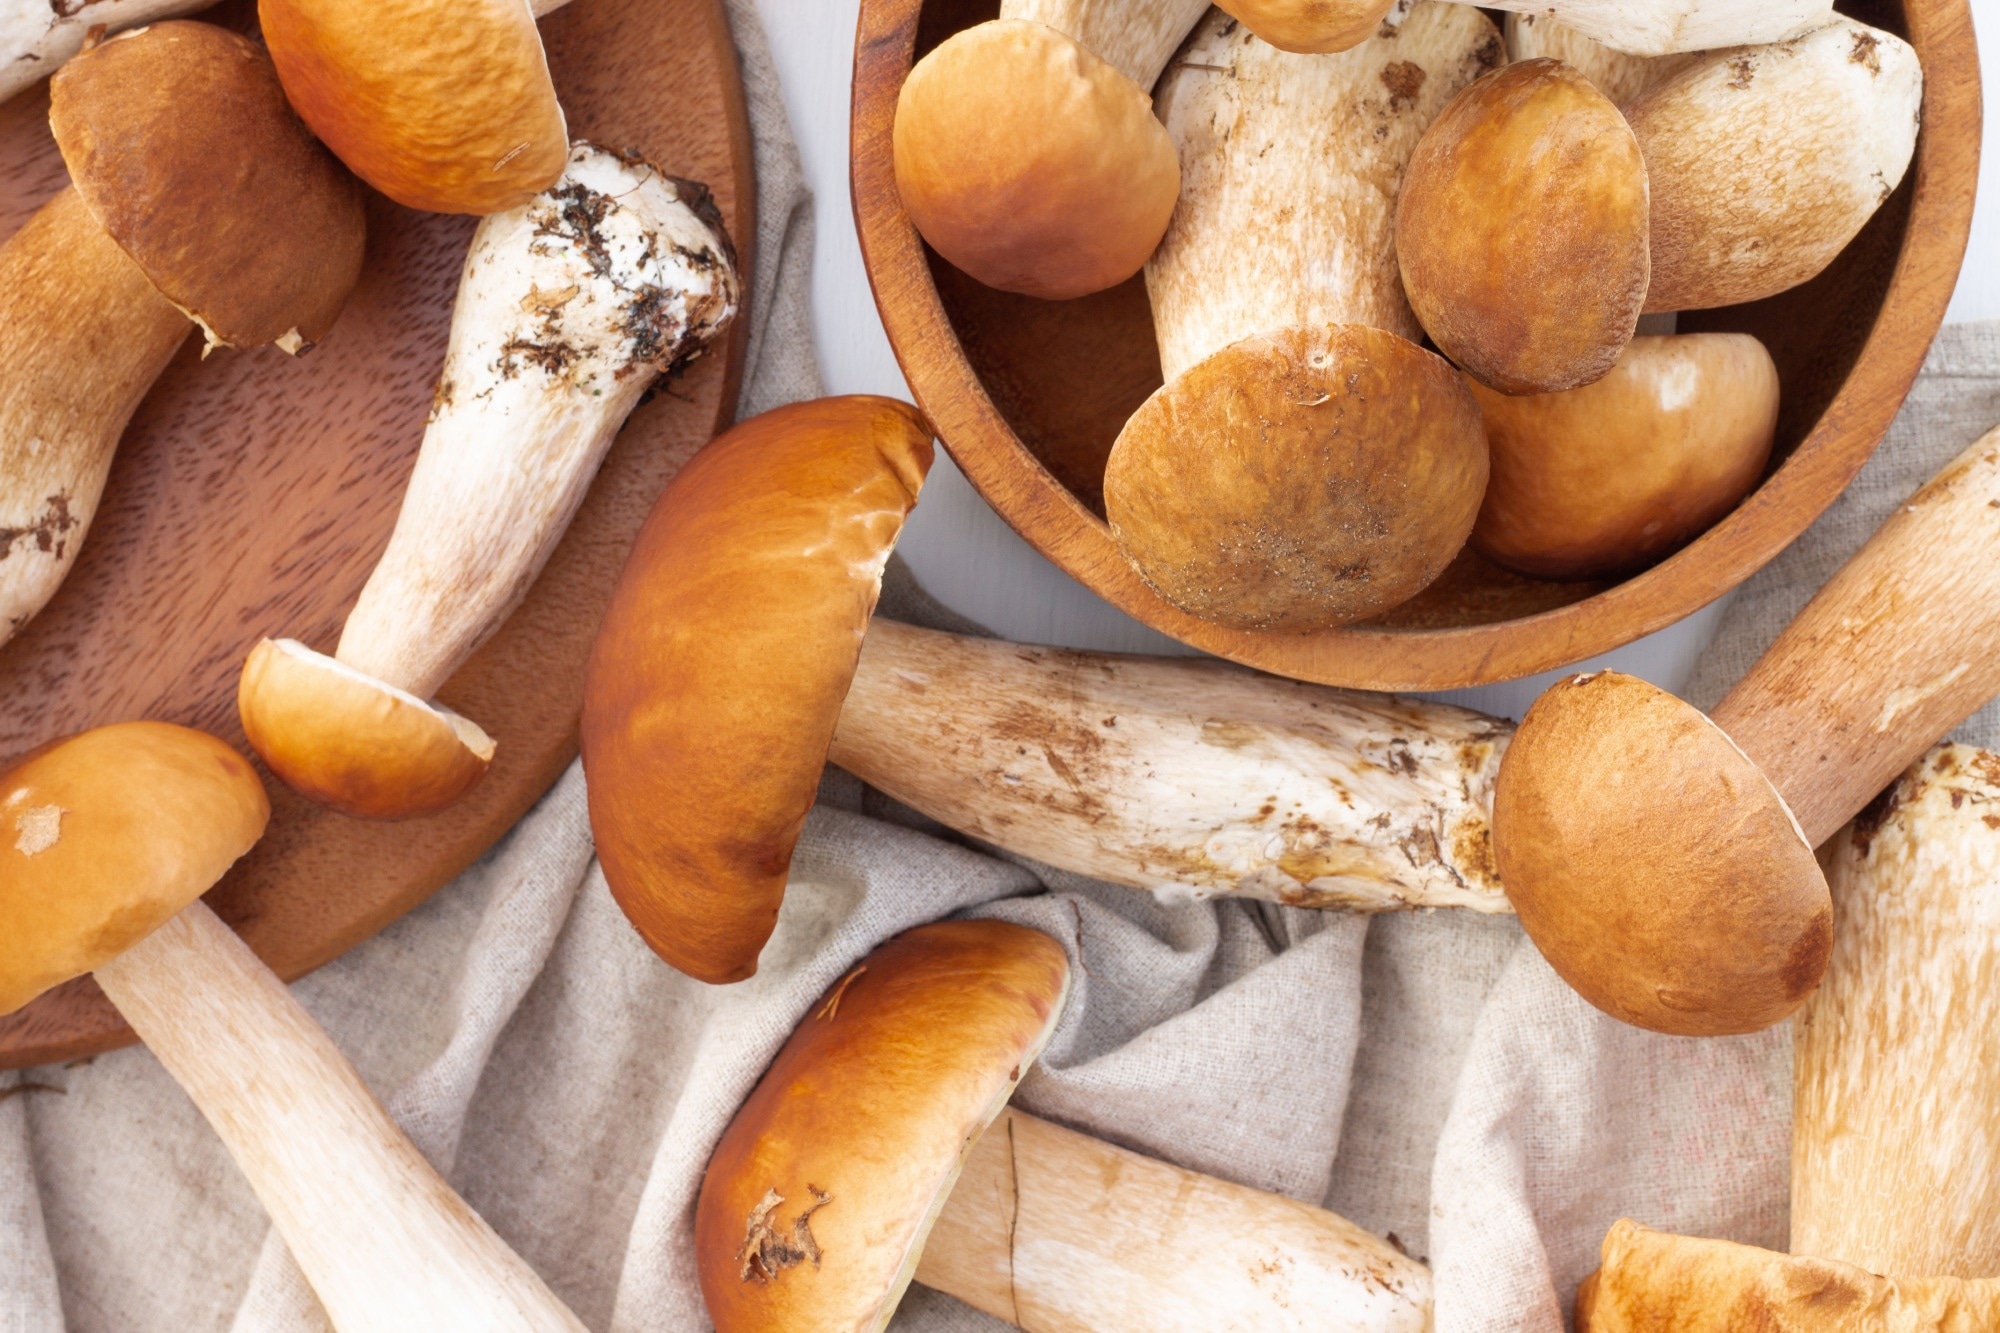 Study: MUSHROOMS4LIFE: Decoding the molecular basis of a cancer-preventing small RNA extracted from edible mushrooms.  Image credit: JeannieR/Shutterstock